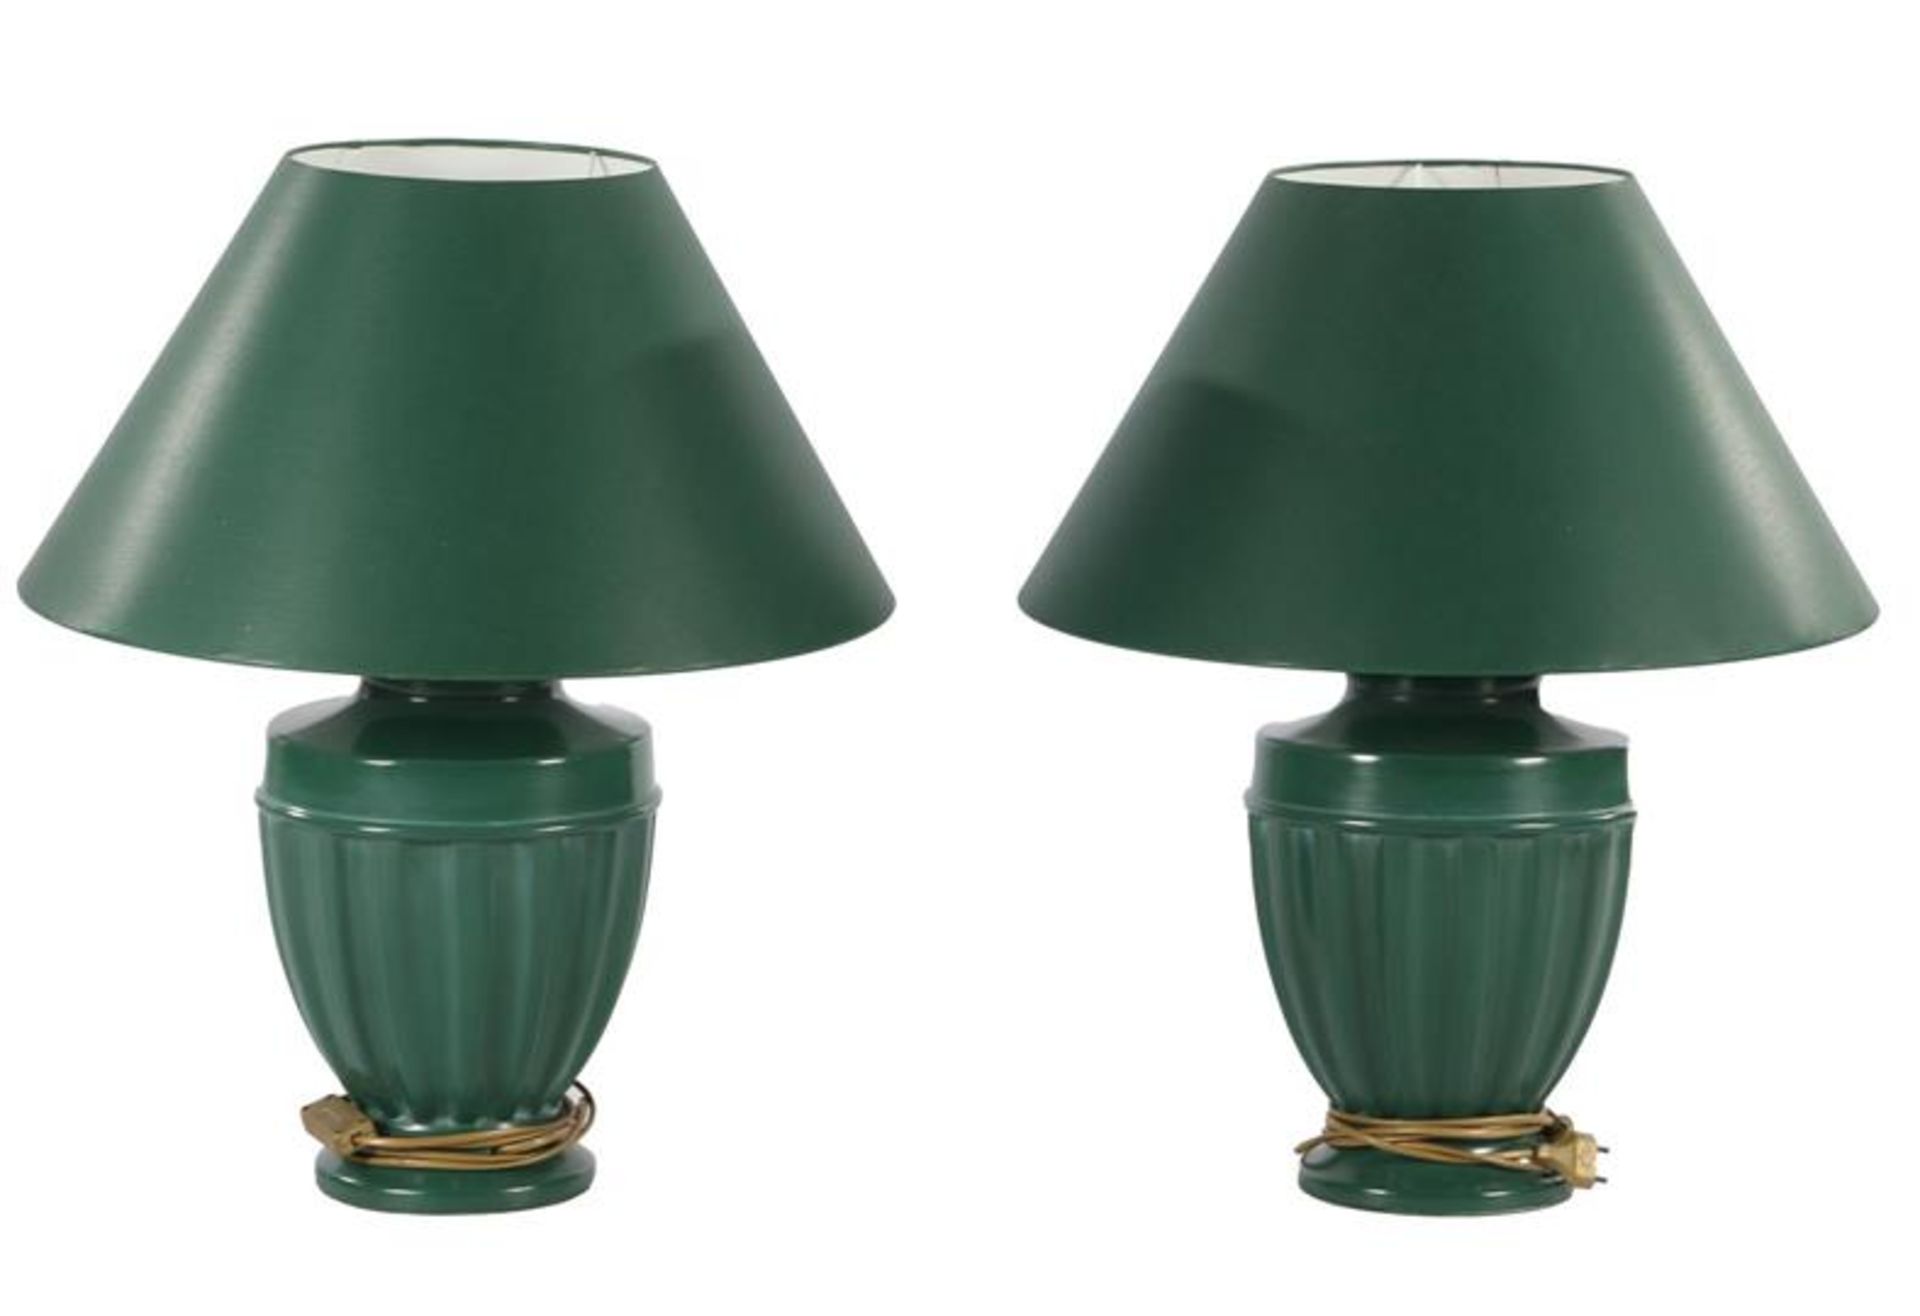 2 green table table lamps on earthenware base, 63 cm high